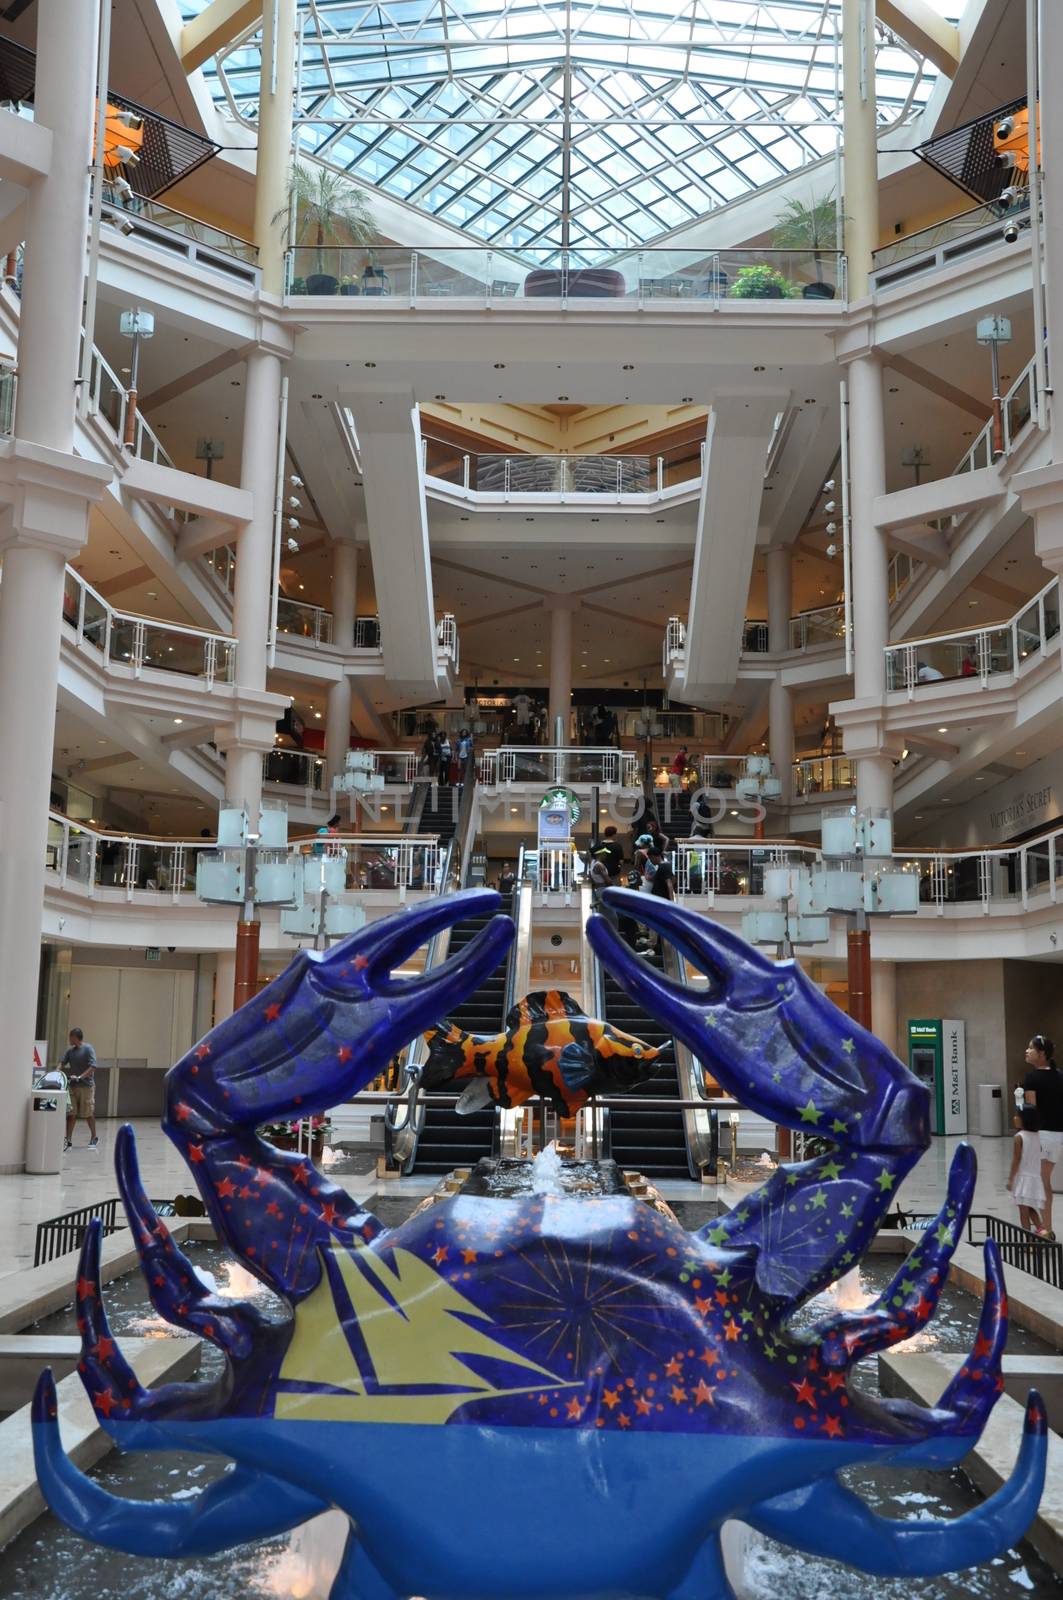 The interior of The Gallery at Harborplace in Baltimore, Maryland